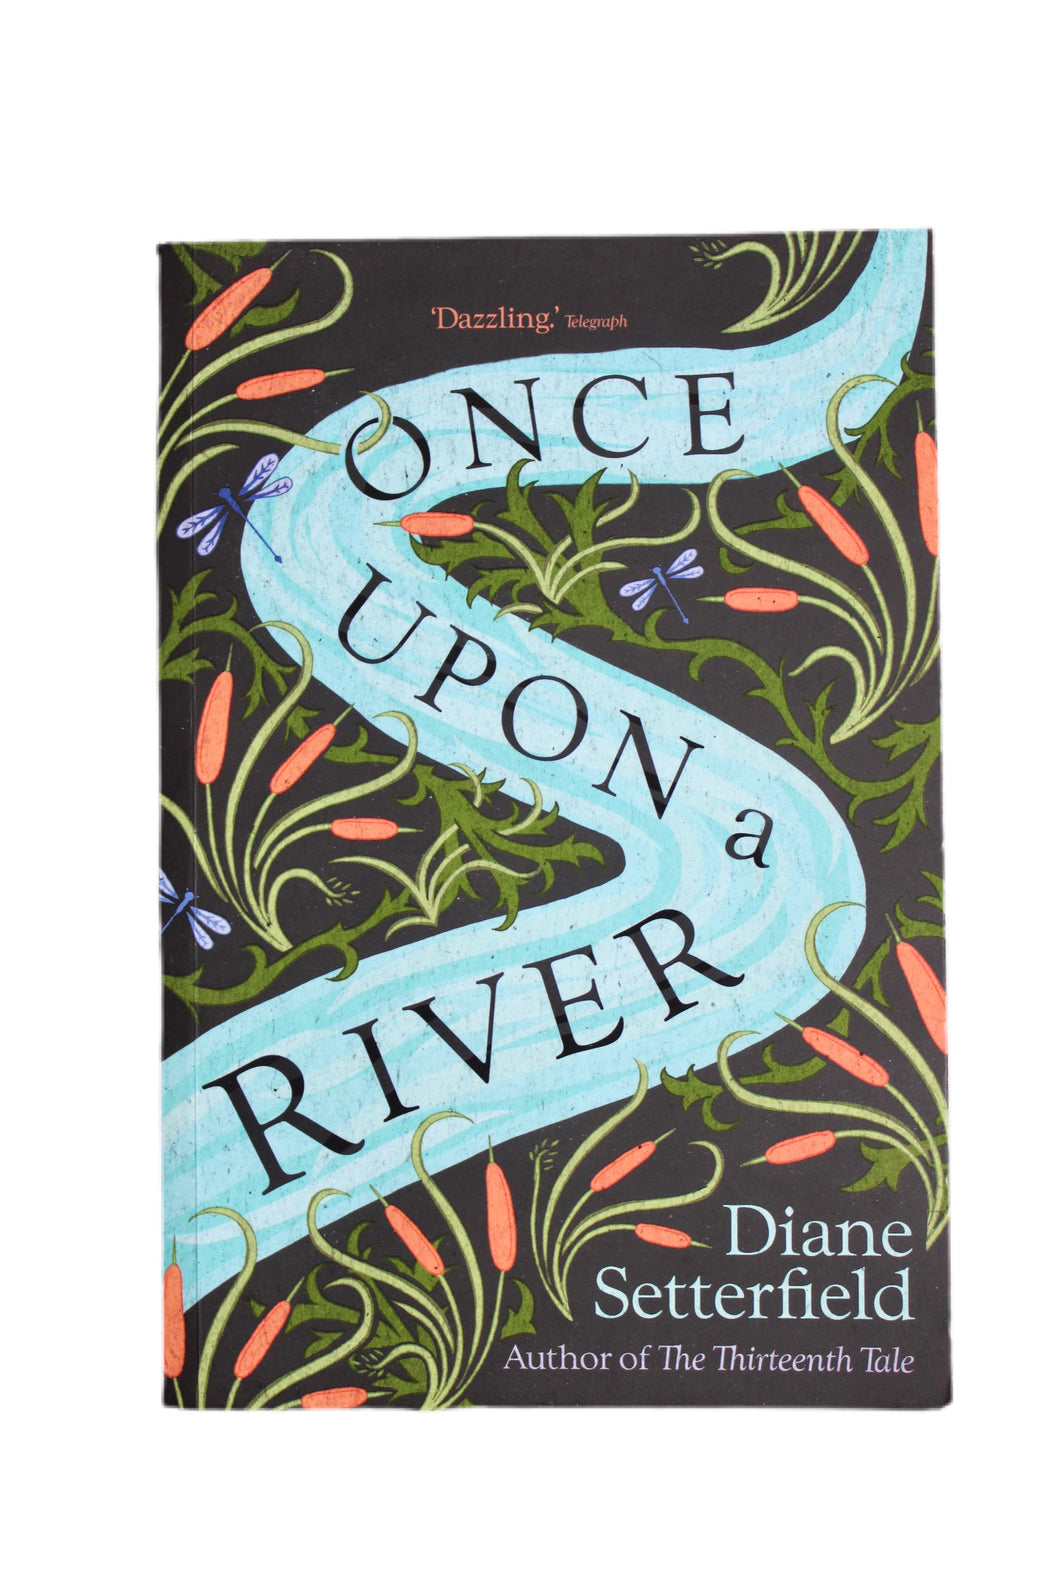 Once Upon A River by Diane Setterfield